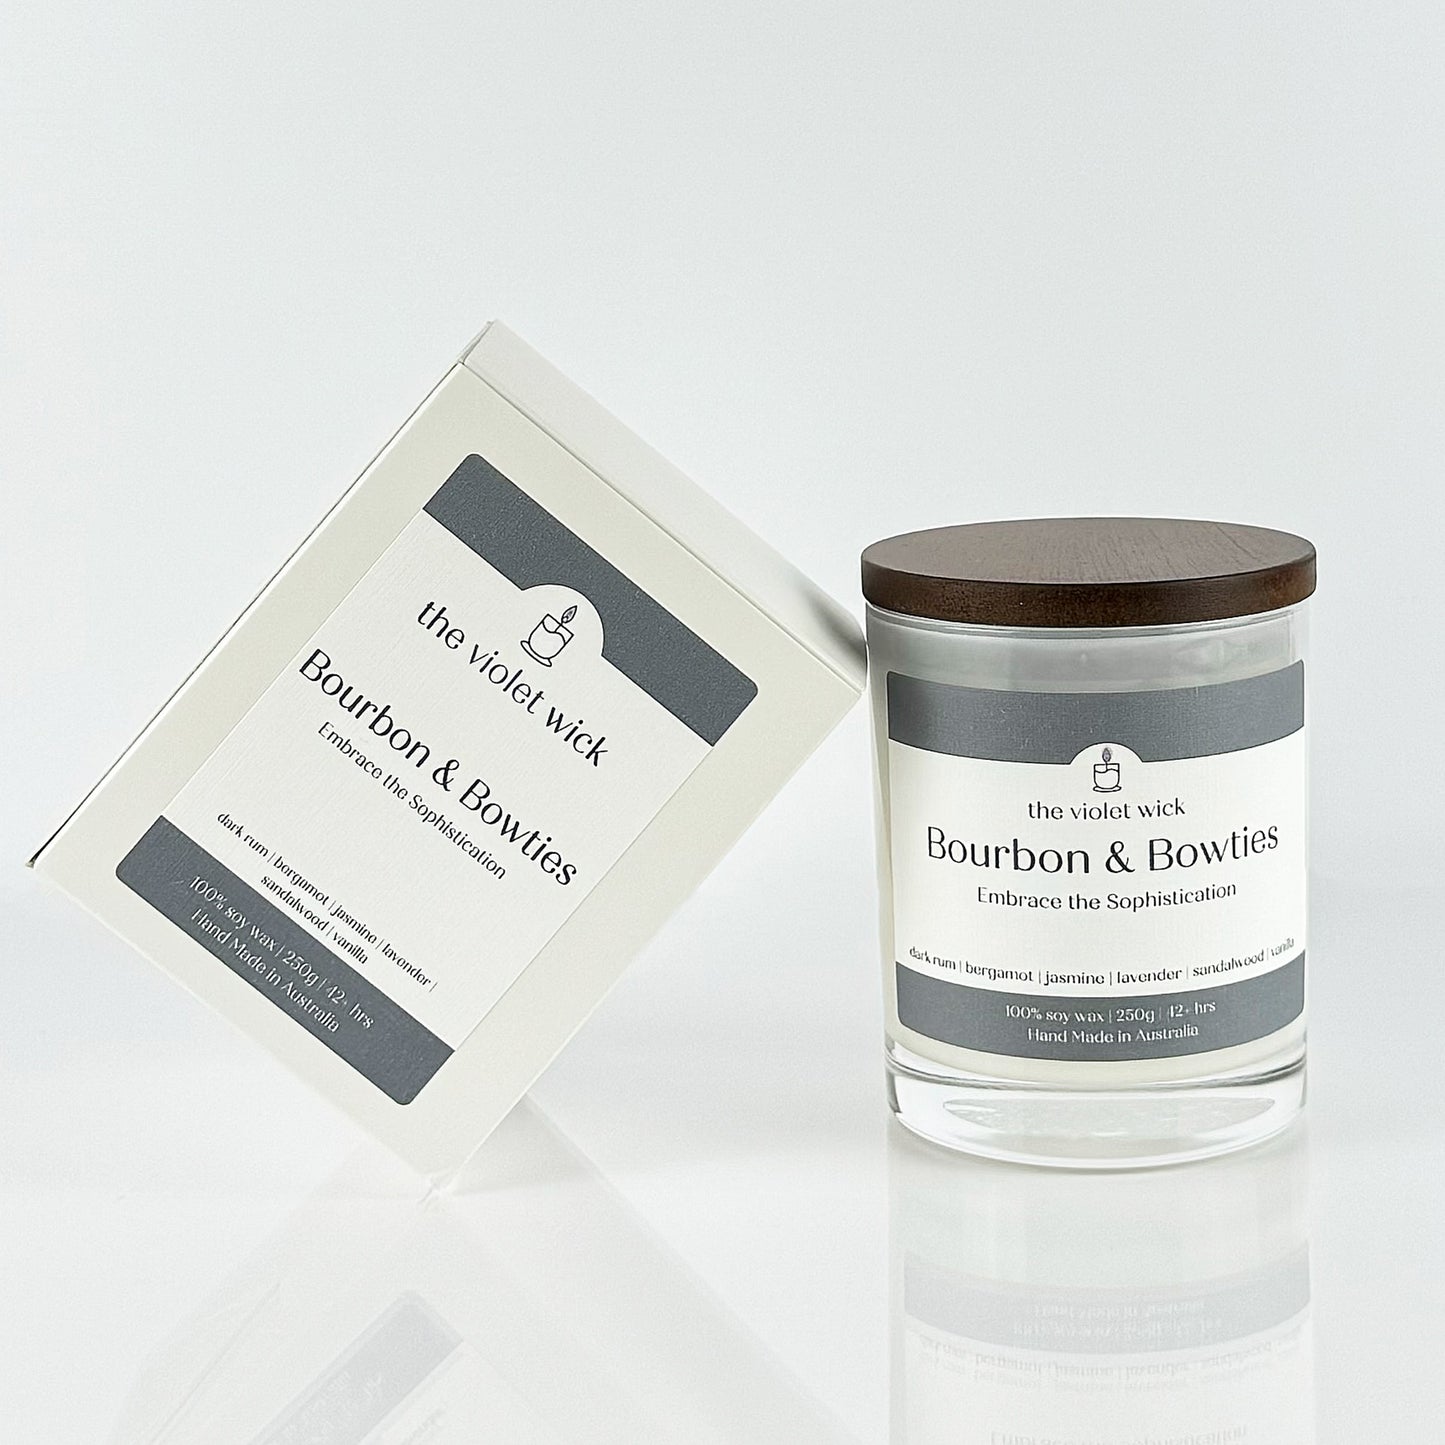 Bourbon & Bowties Soy Candle from The Violet Wick